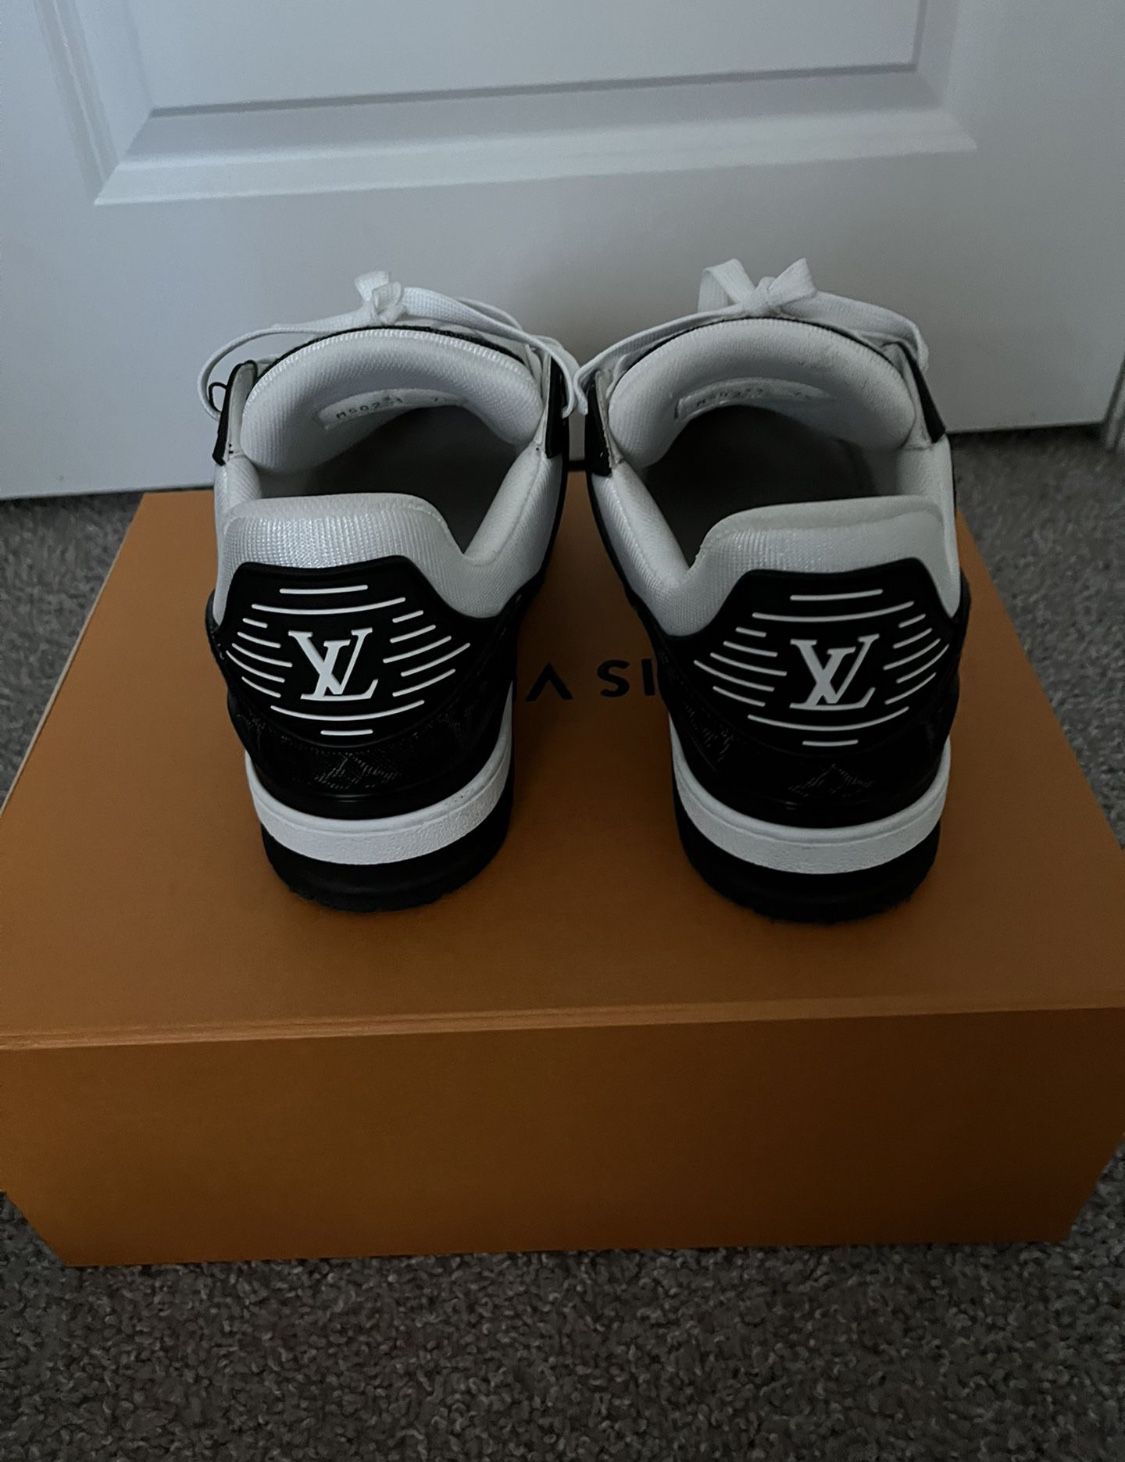 Louis Vuitton Trainer sneaker for Sale in Bowie, MD - OfferUp